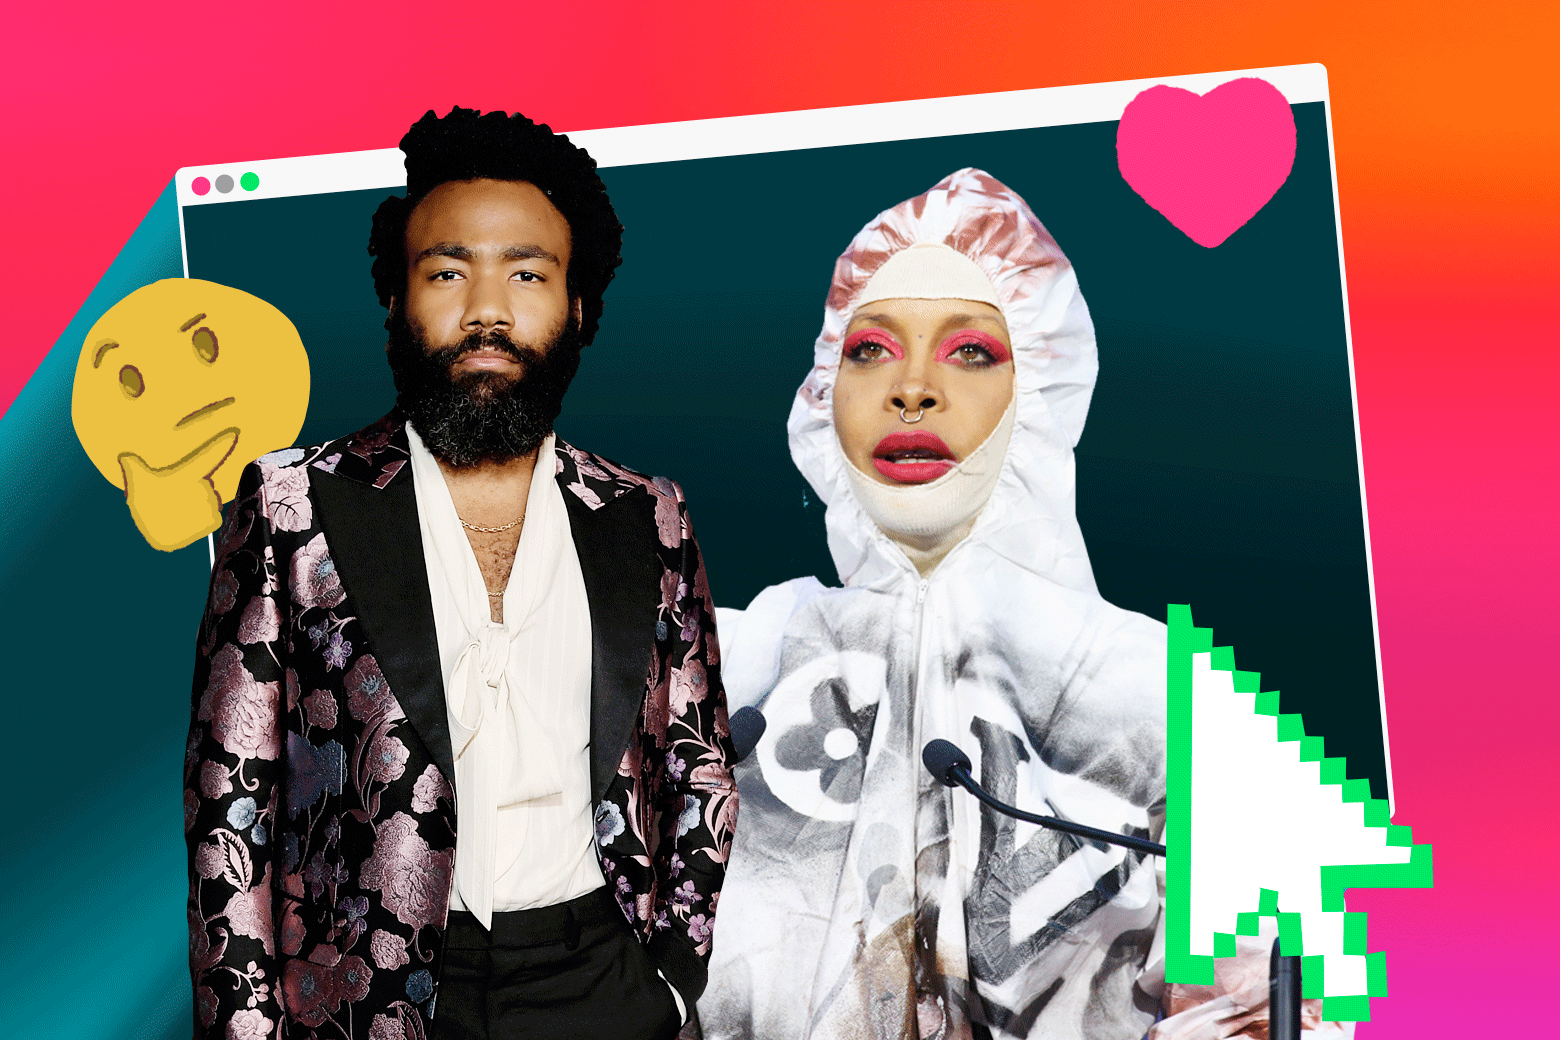 A bearded Childish Gambino looking snazzy in a purple floral blazer and a white V-neck dress shirt. Erykah Badu in a hazmat suit—but make it fashion. Around them, a thinking-face emoji and a heart.